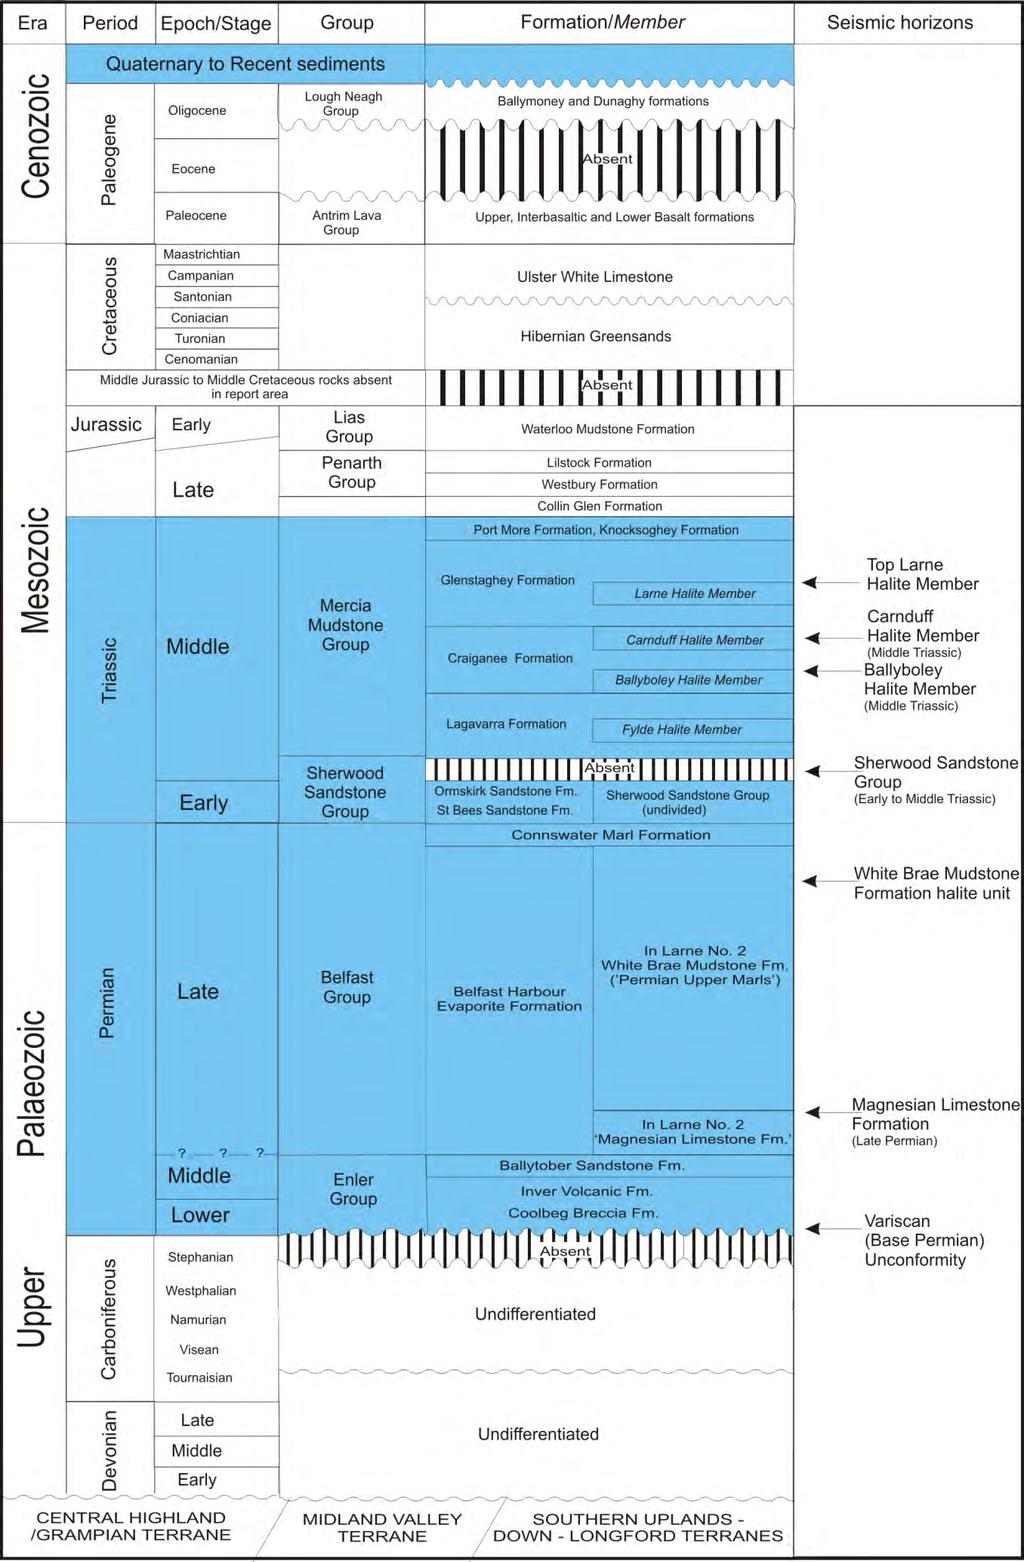 Figure 4. Summary of stratigraphic nomenclature used in this report.